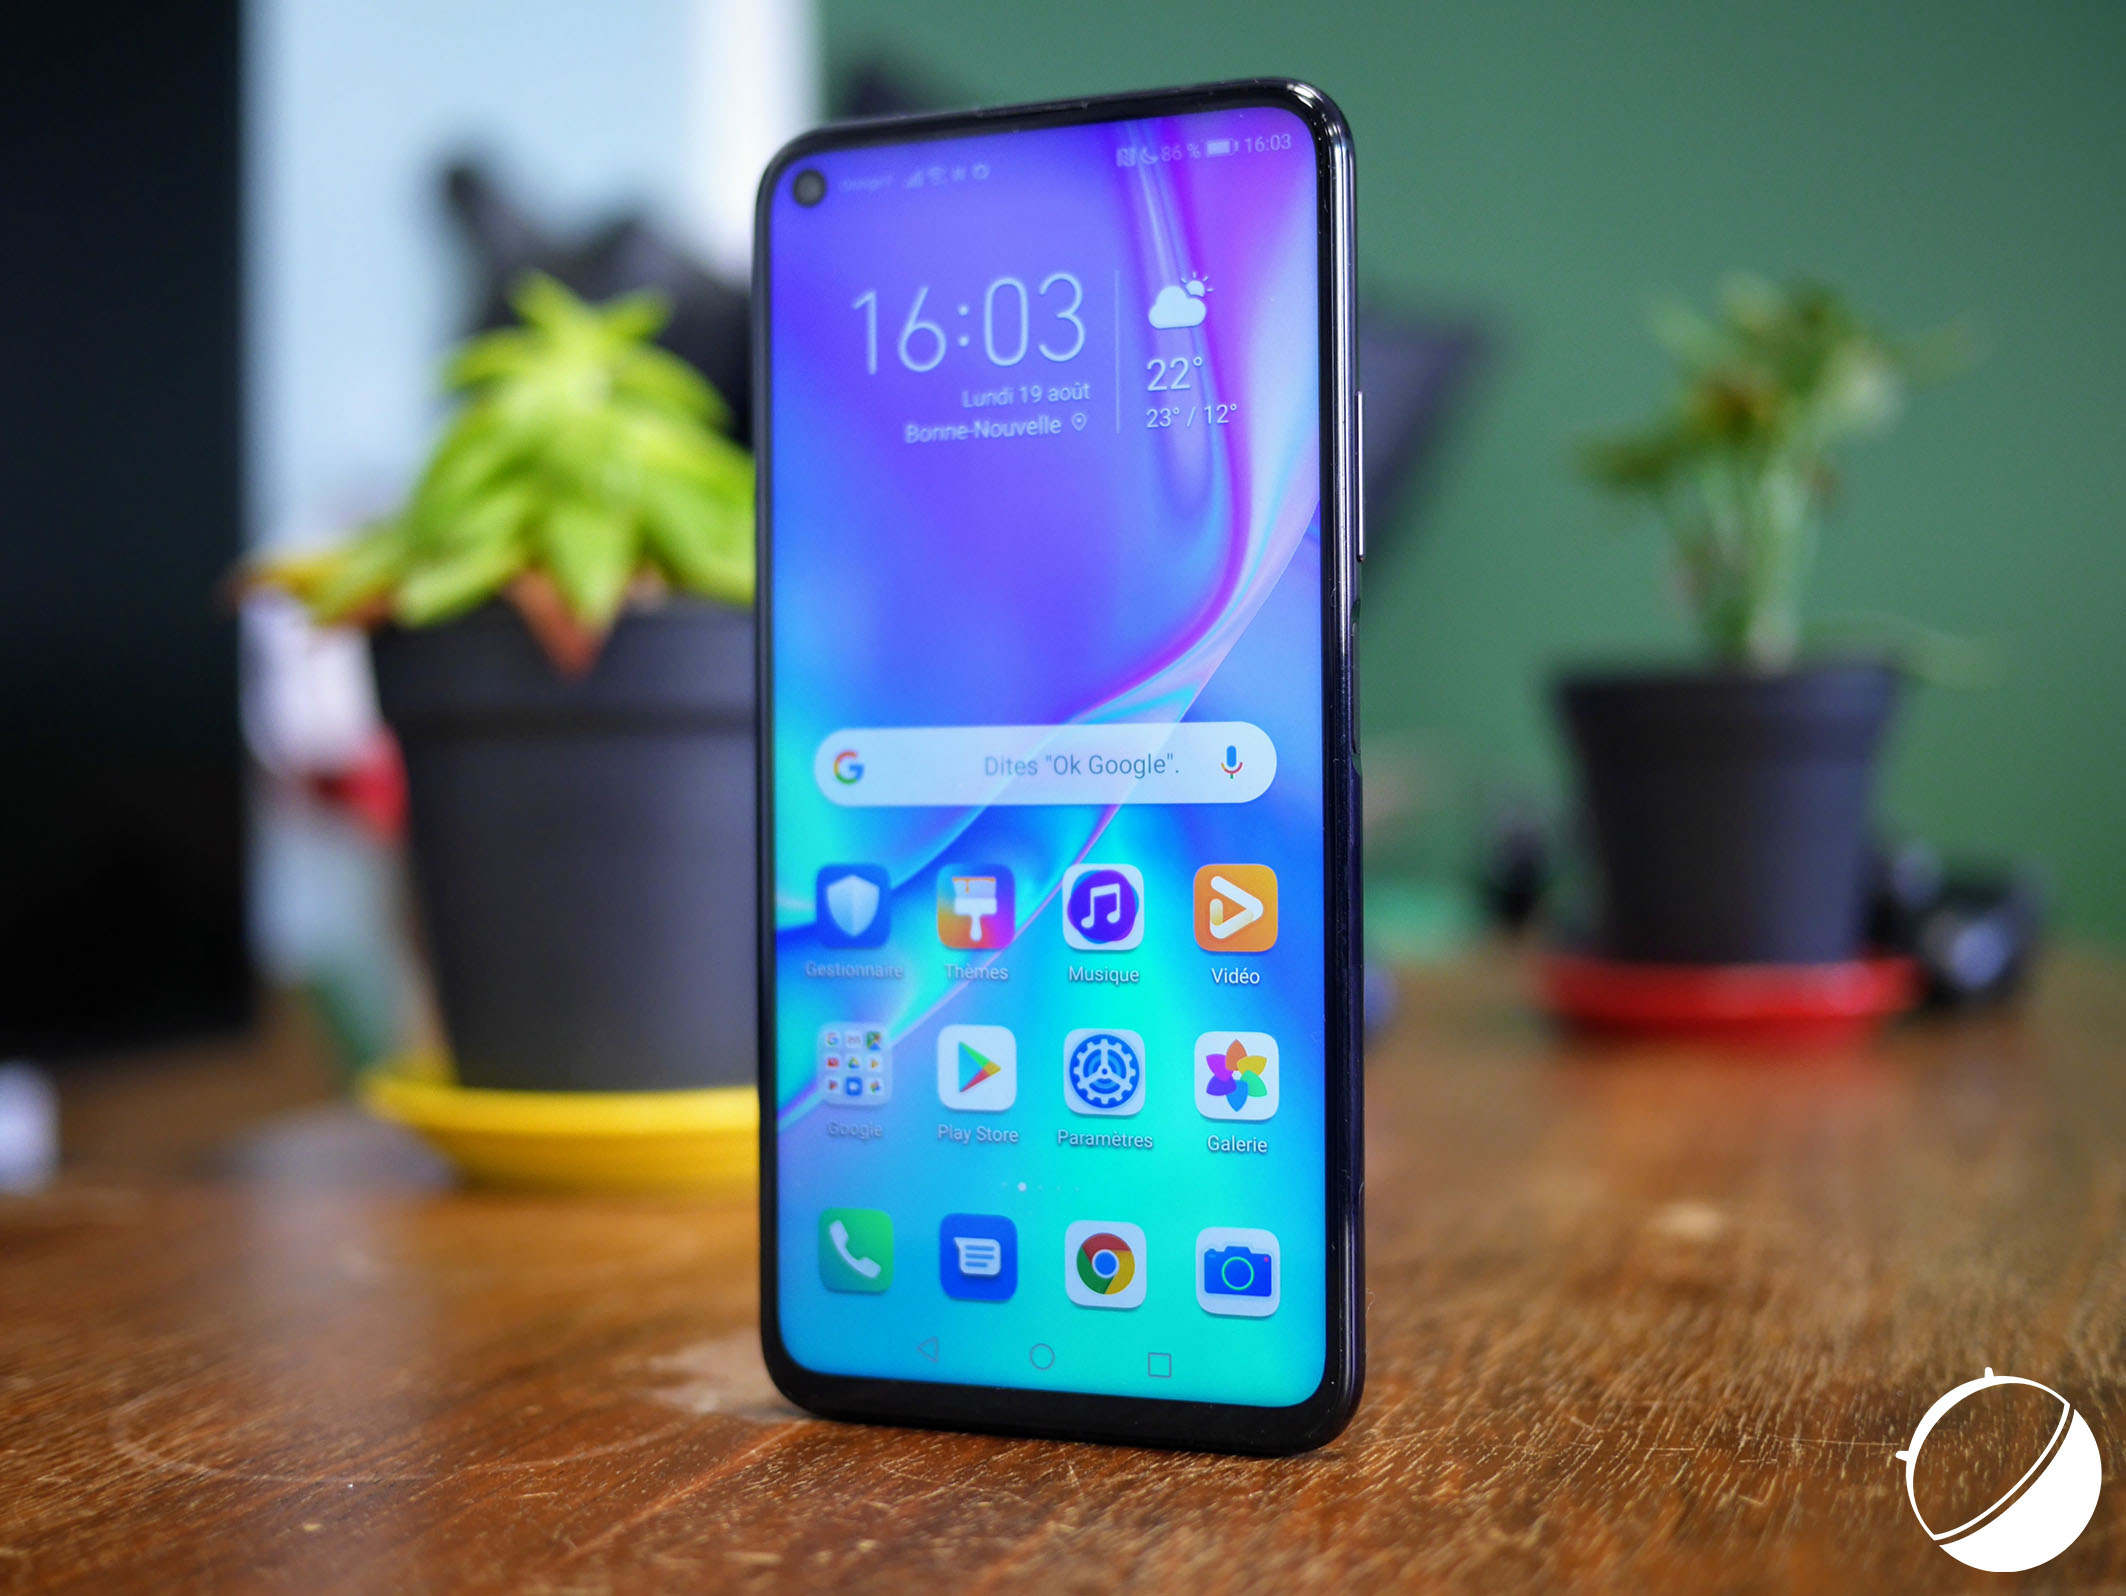 Huawei honor какой лучше. Honor view 20 Pro. Honor 20 Pro 8/256gb. Honor 20 Pro narxiu. Honor hb466589efw.